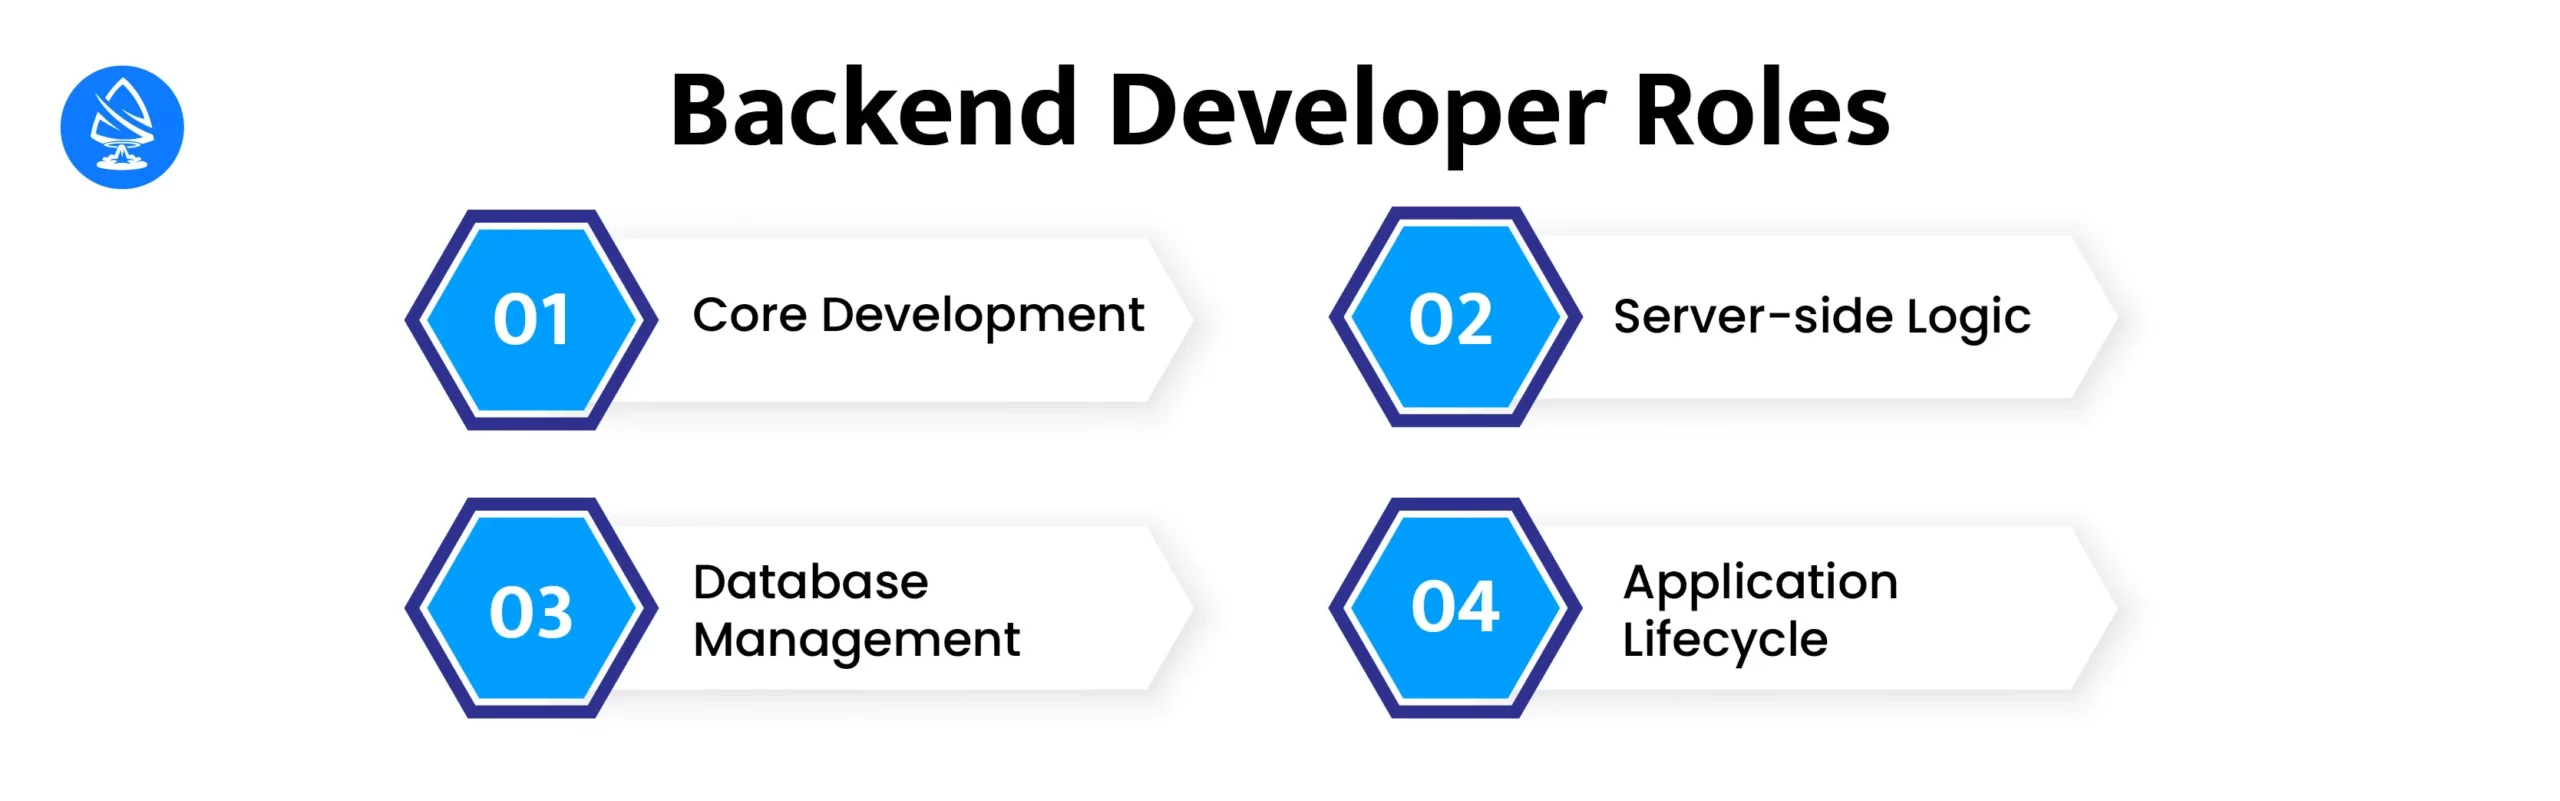 Backend Developer Roles and Responsibilities